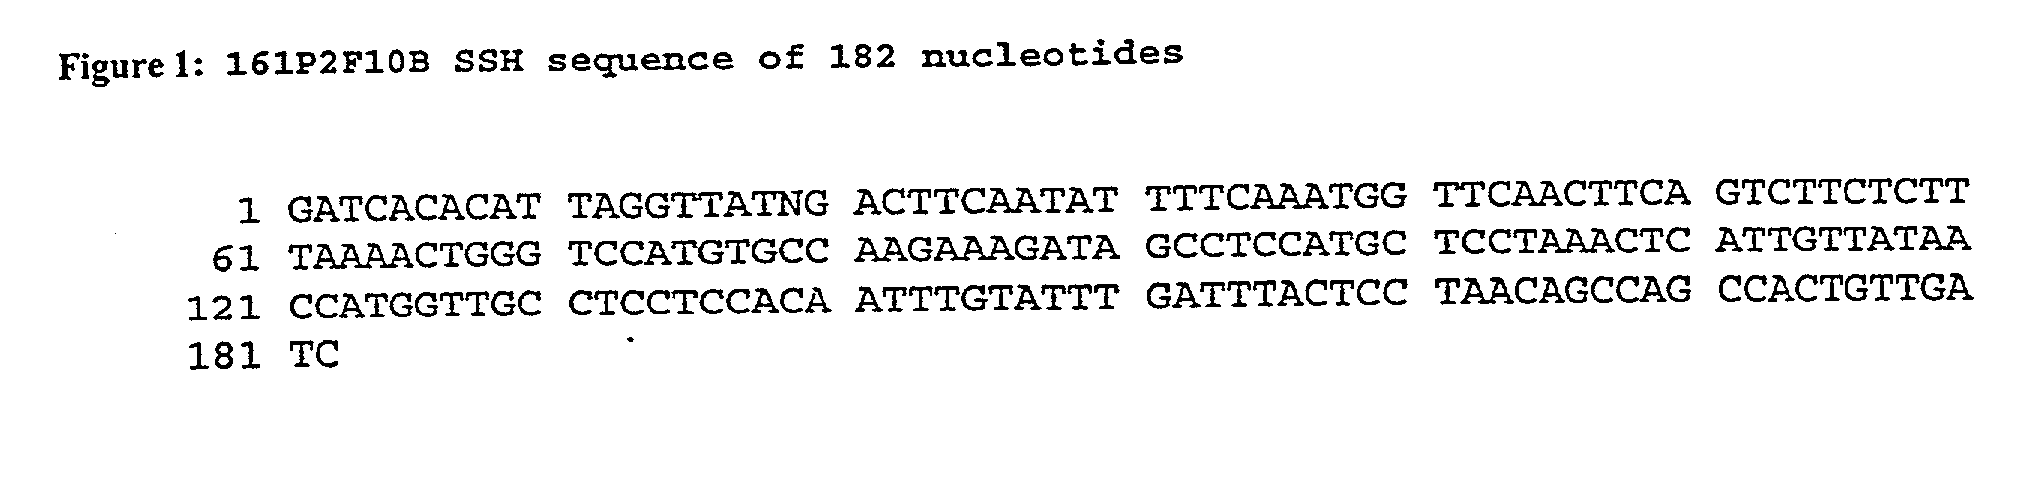 Nucleic acid and corresponding protein entitled 161P2F10B useful in treatment and detection of cancer